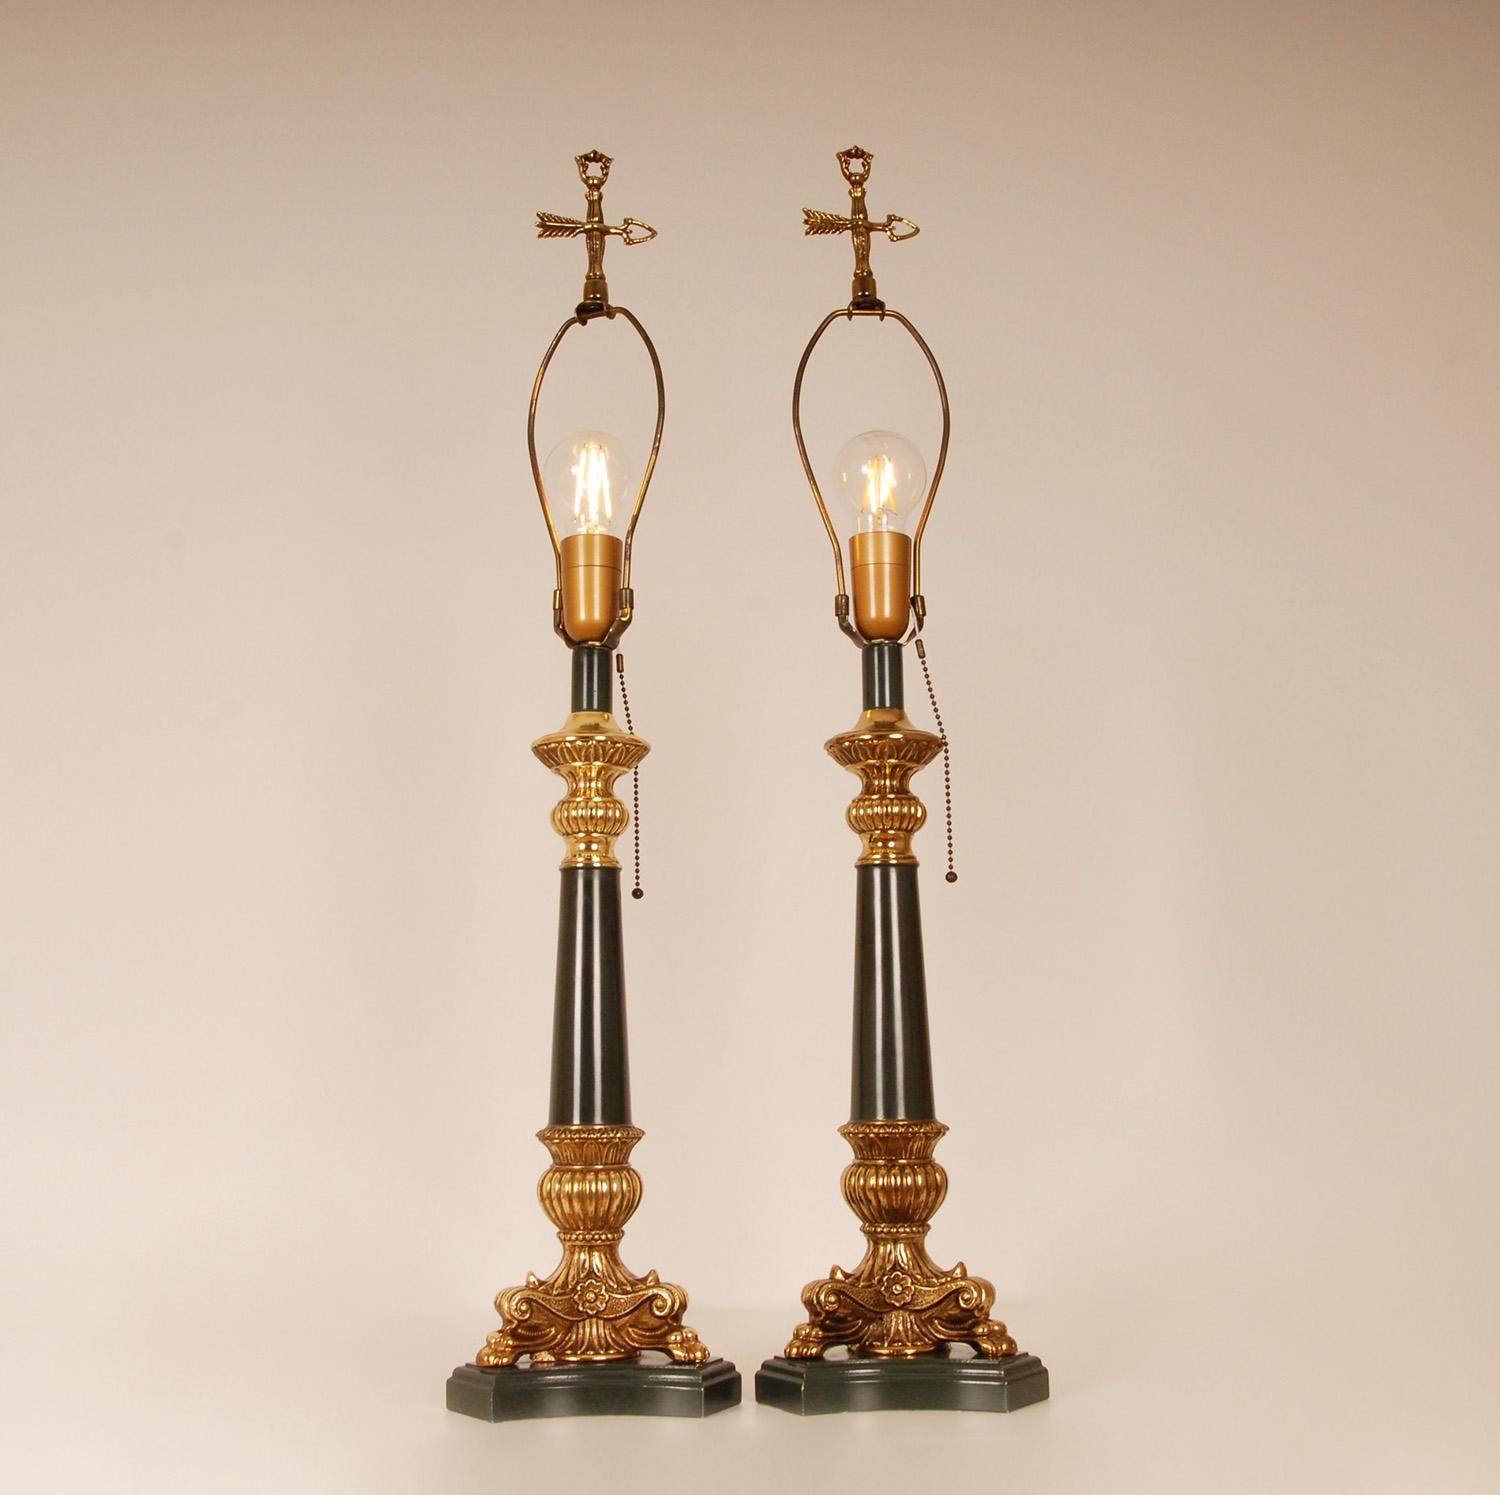 French Bouillotte Lamps Napoleonic Empire Green Gold Gilded Vintage Table Lamps For Sale 1